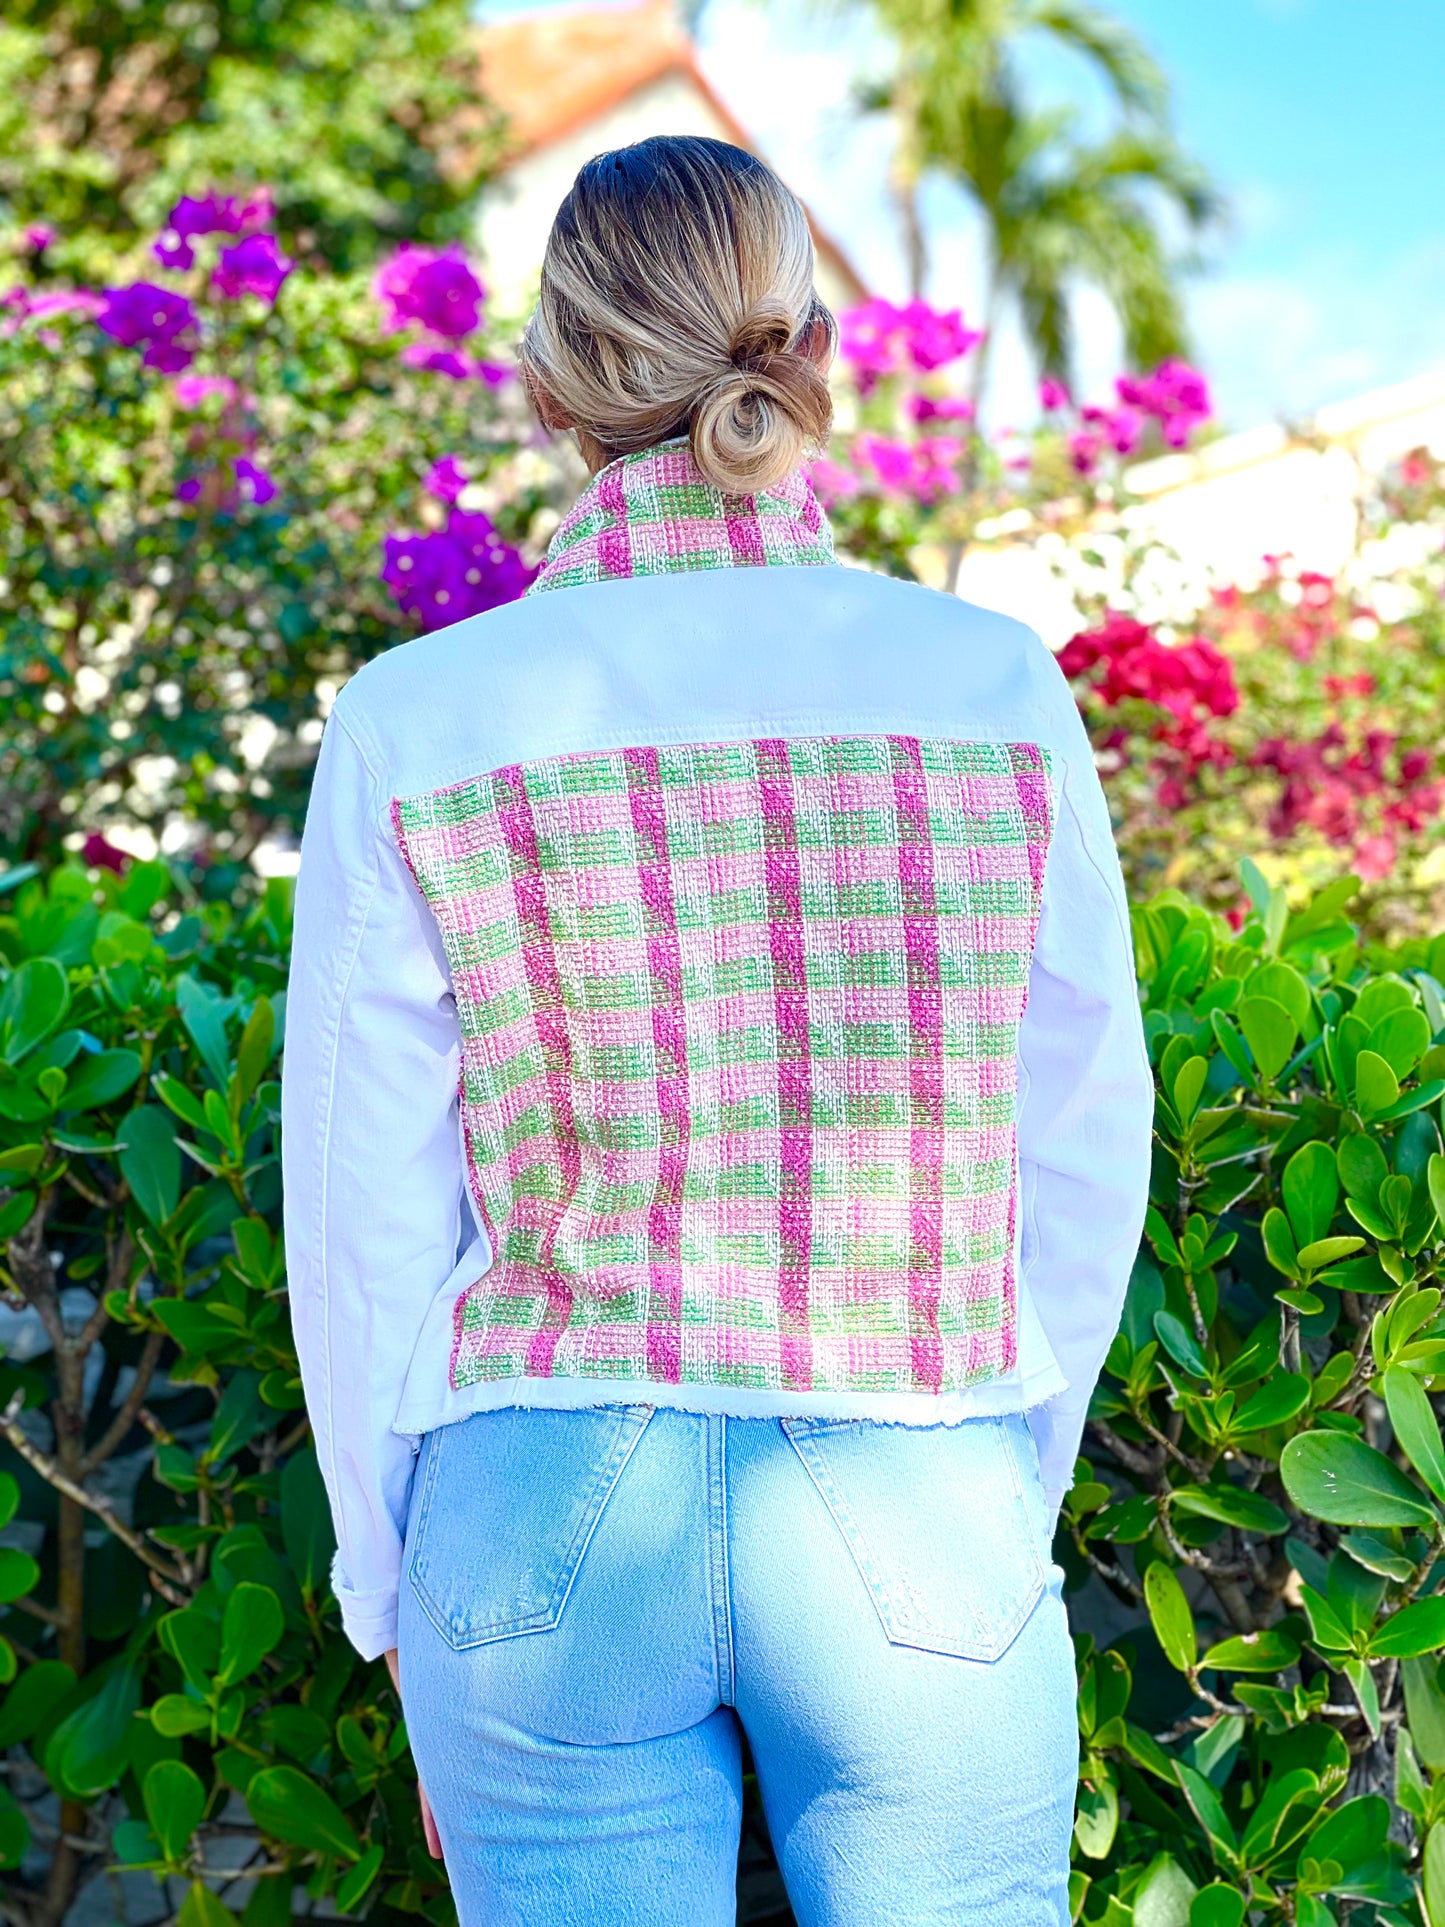 The White Denim Jacket / Pink and Green Tweed